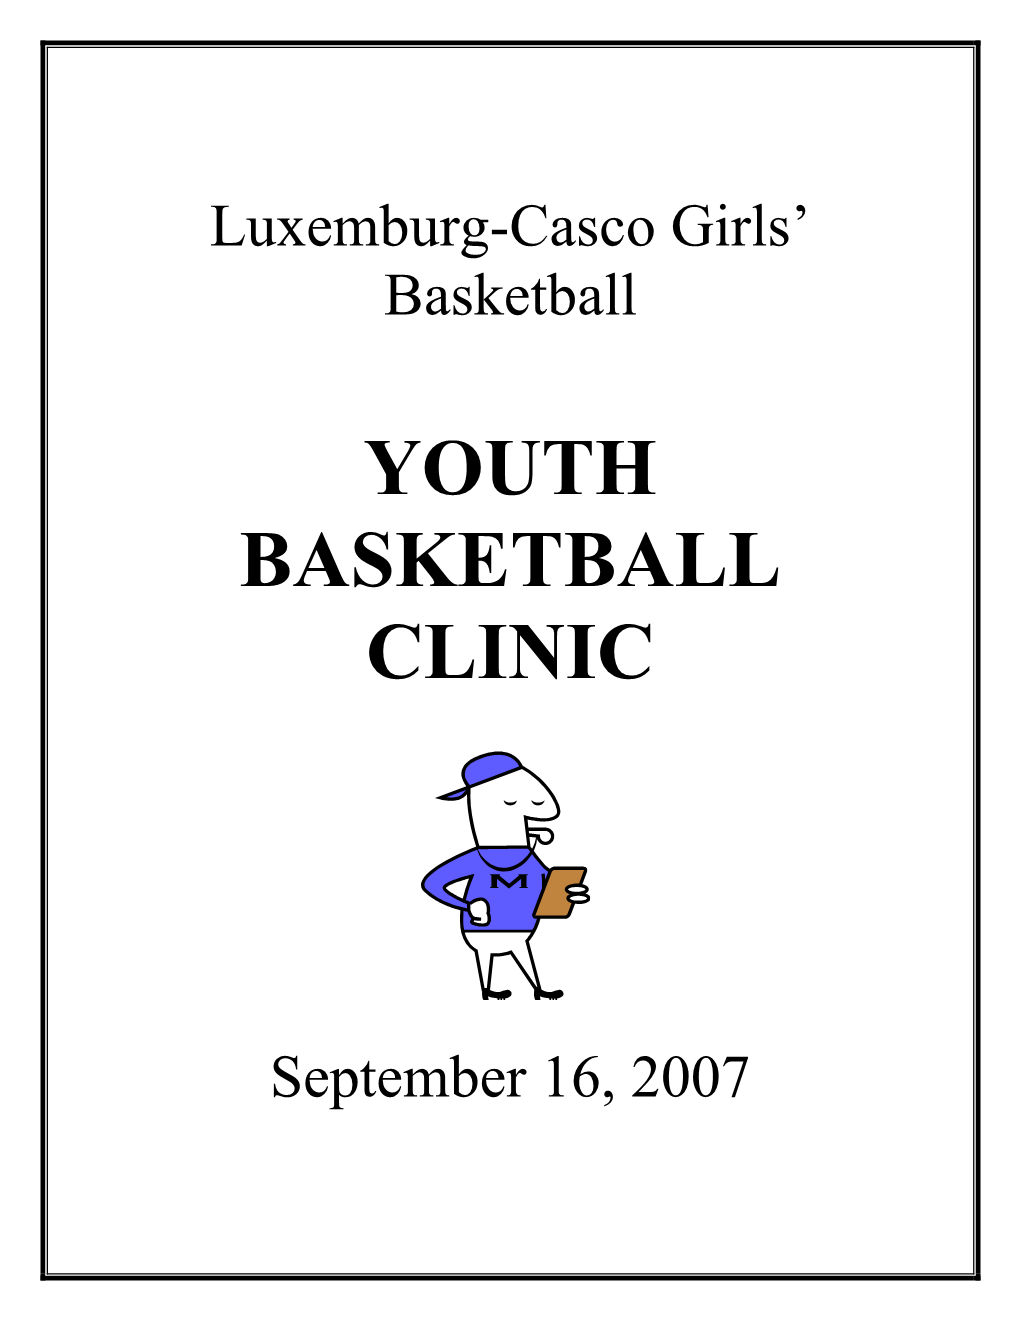 Youth Clinic